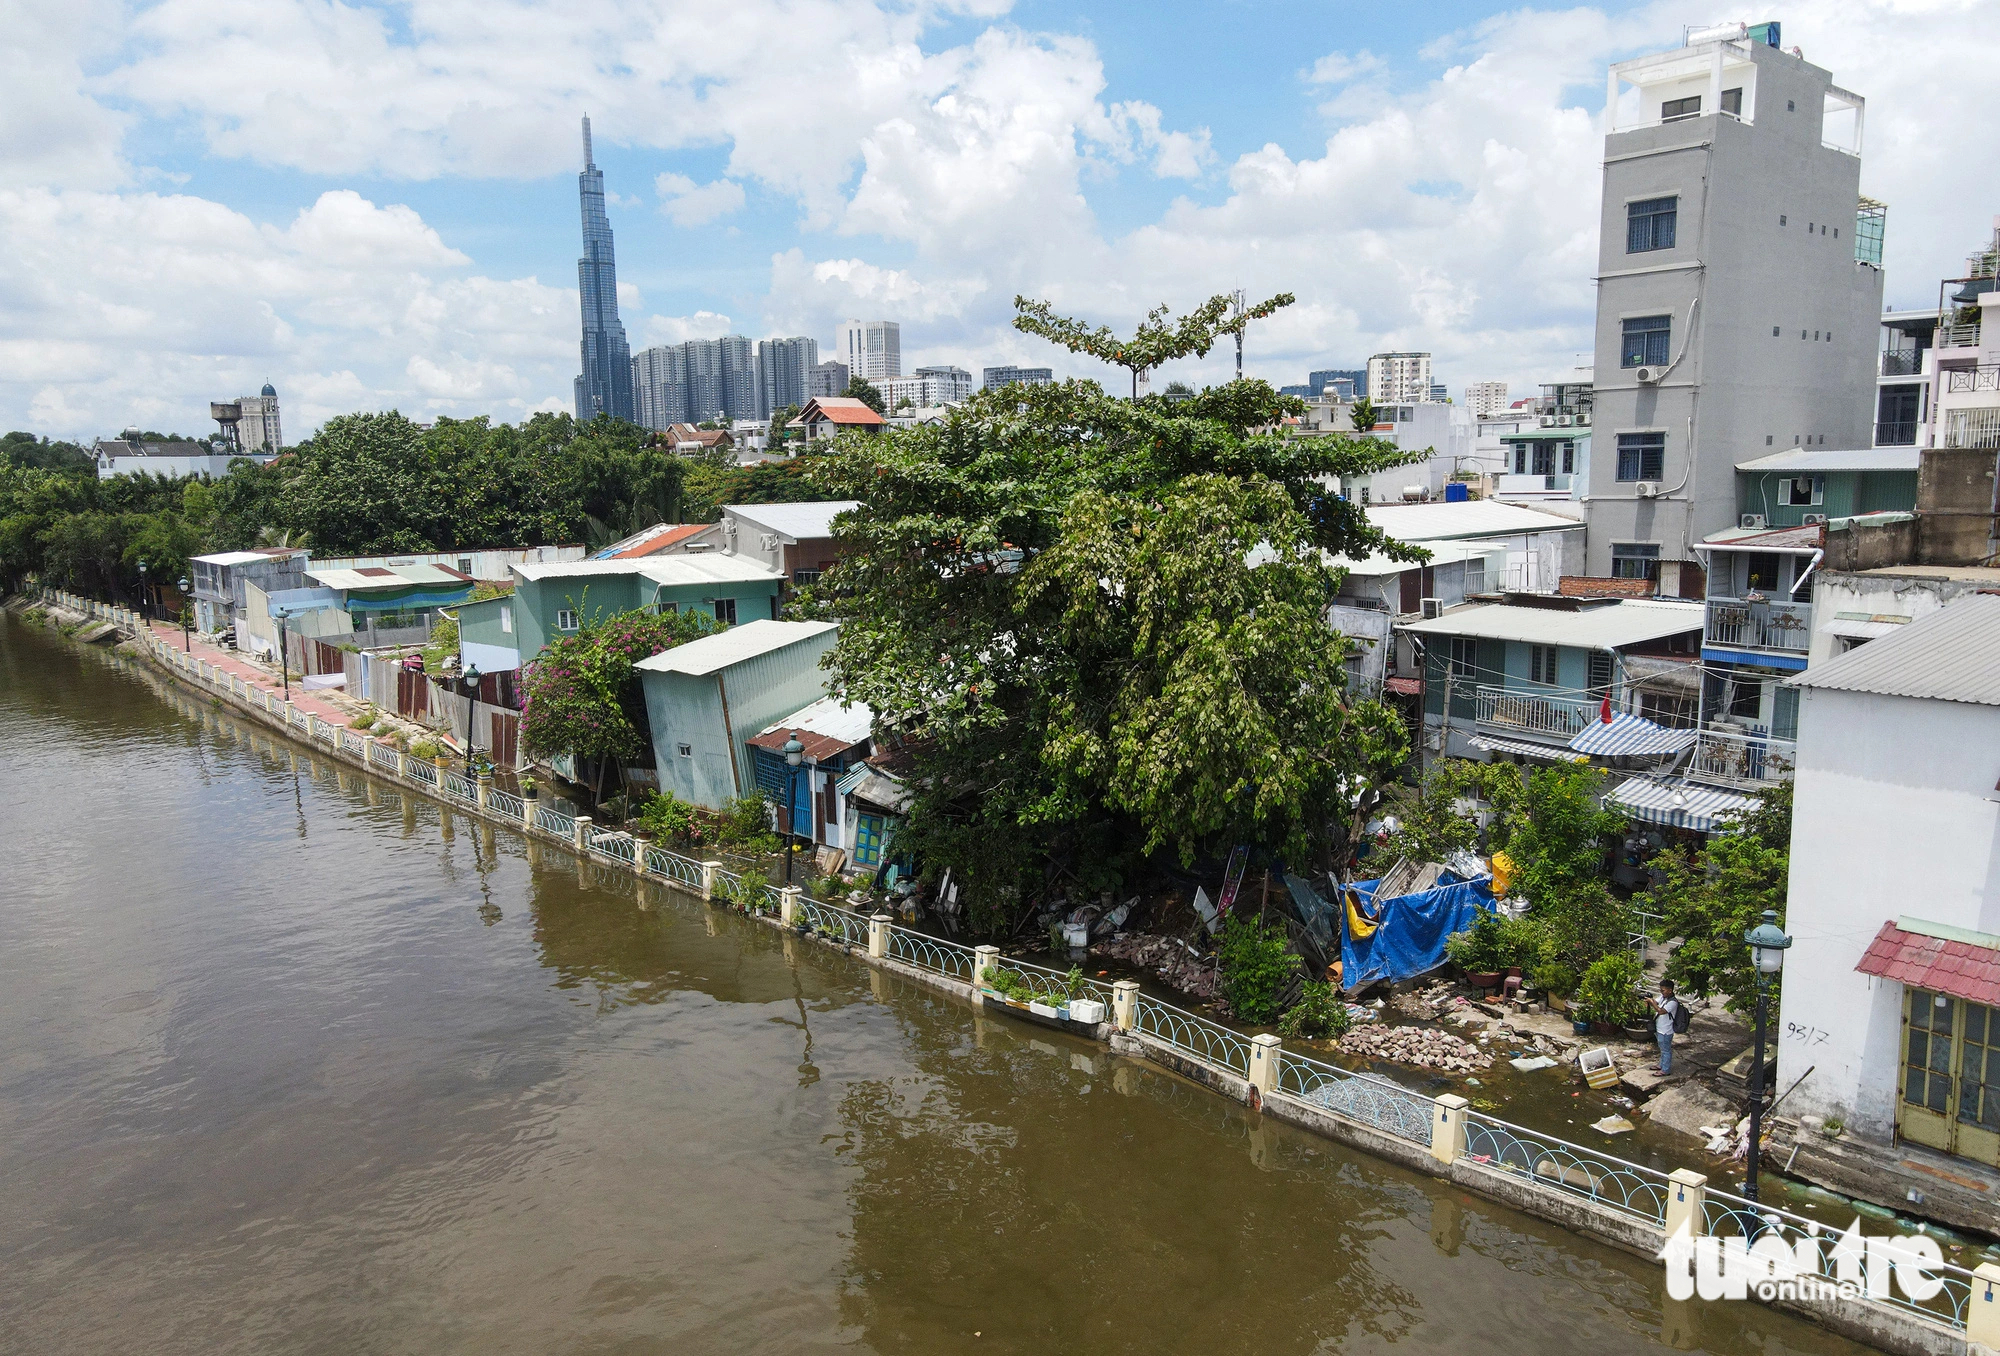 Multiple locations in Binh Thanh District were put on a list of severely-eroded areas. Recently, part of a 120m-long embankment in Thanh Da Peninsula eroded, prompting 13 affected households to take an emergency evacuation. Photo: Chau Tuan / Tuoi Tre